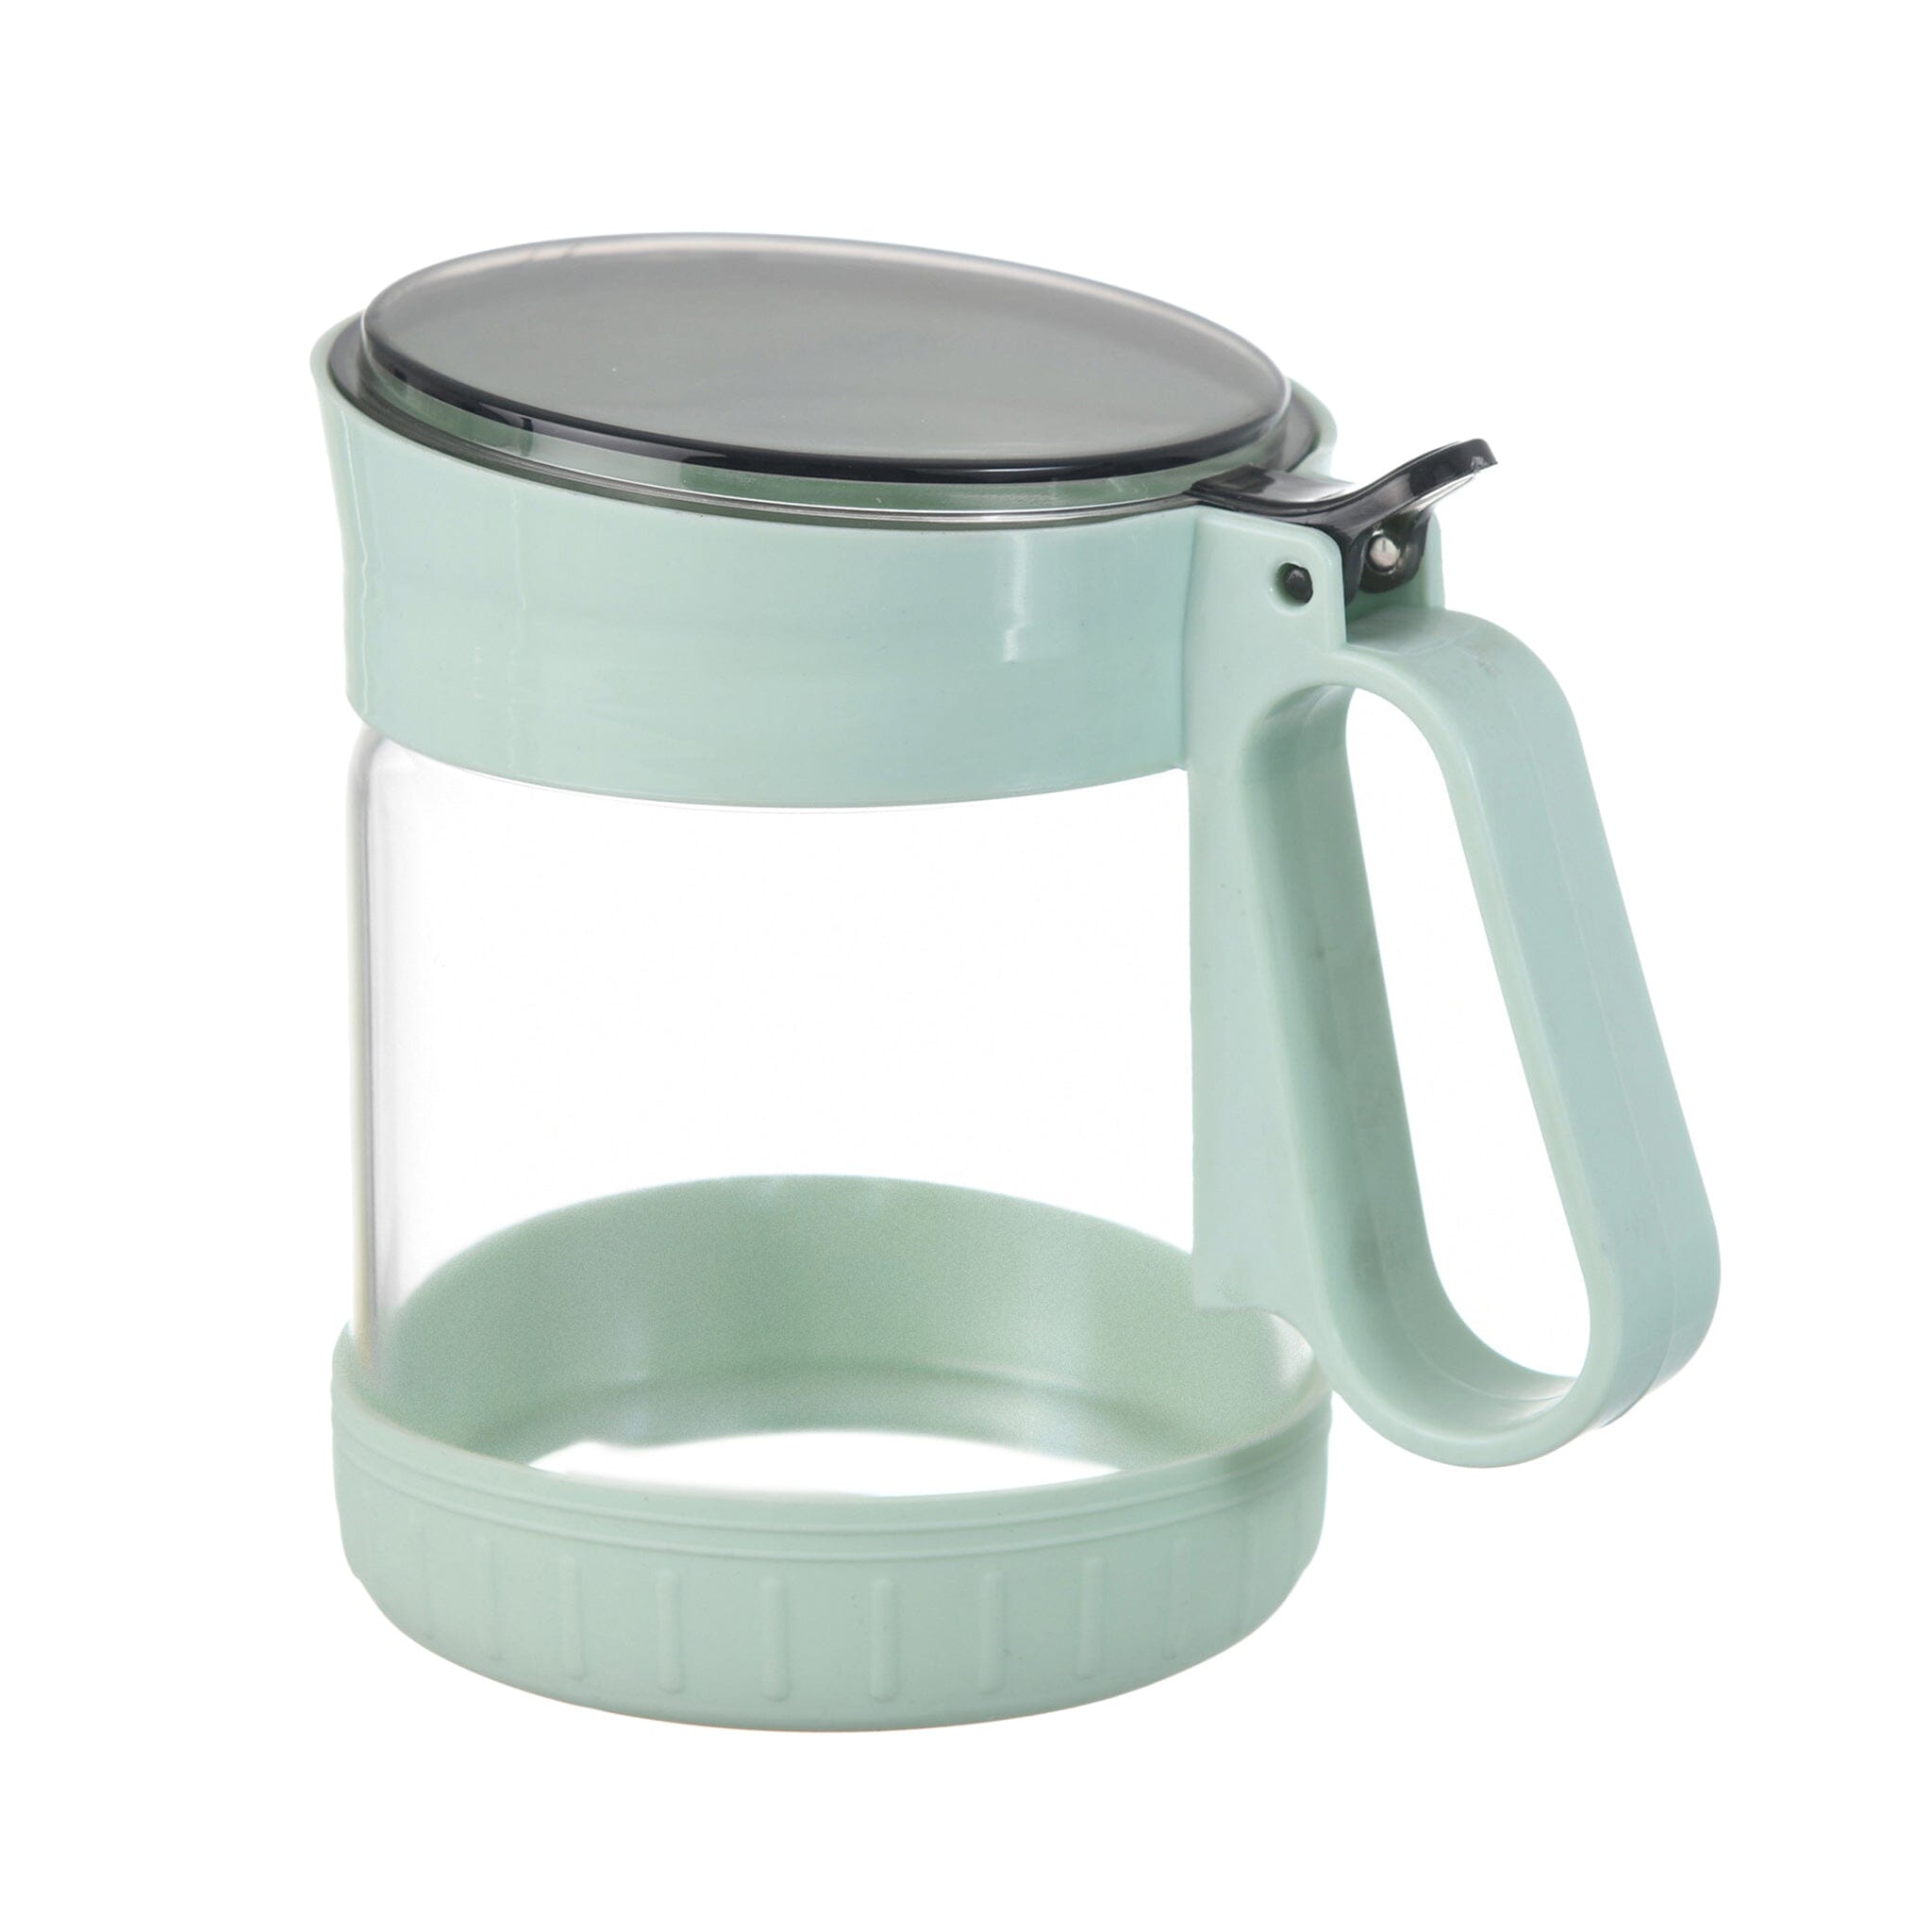 O'lala - Spices Jar with Handle - Mint Green - 8x10cm - 520008131